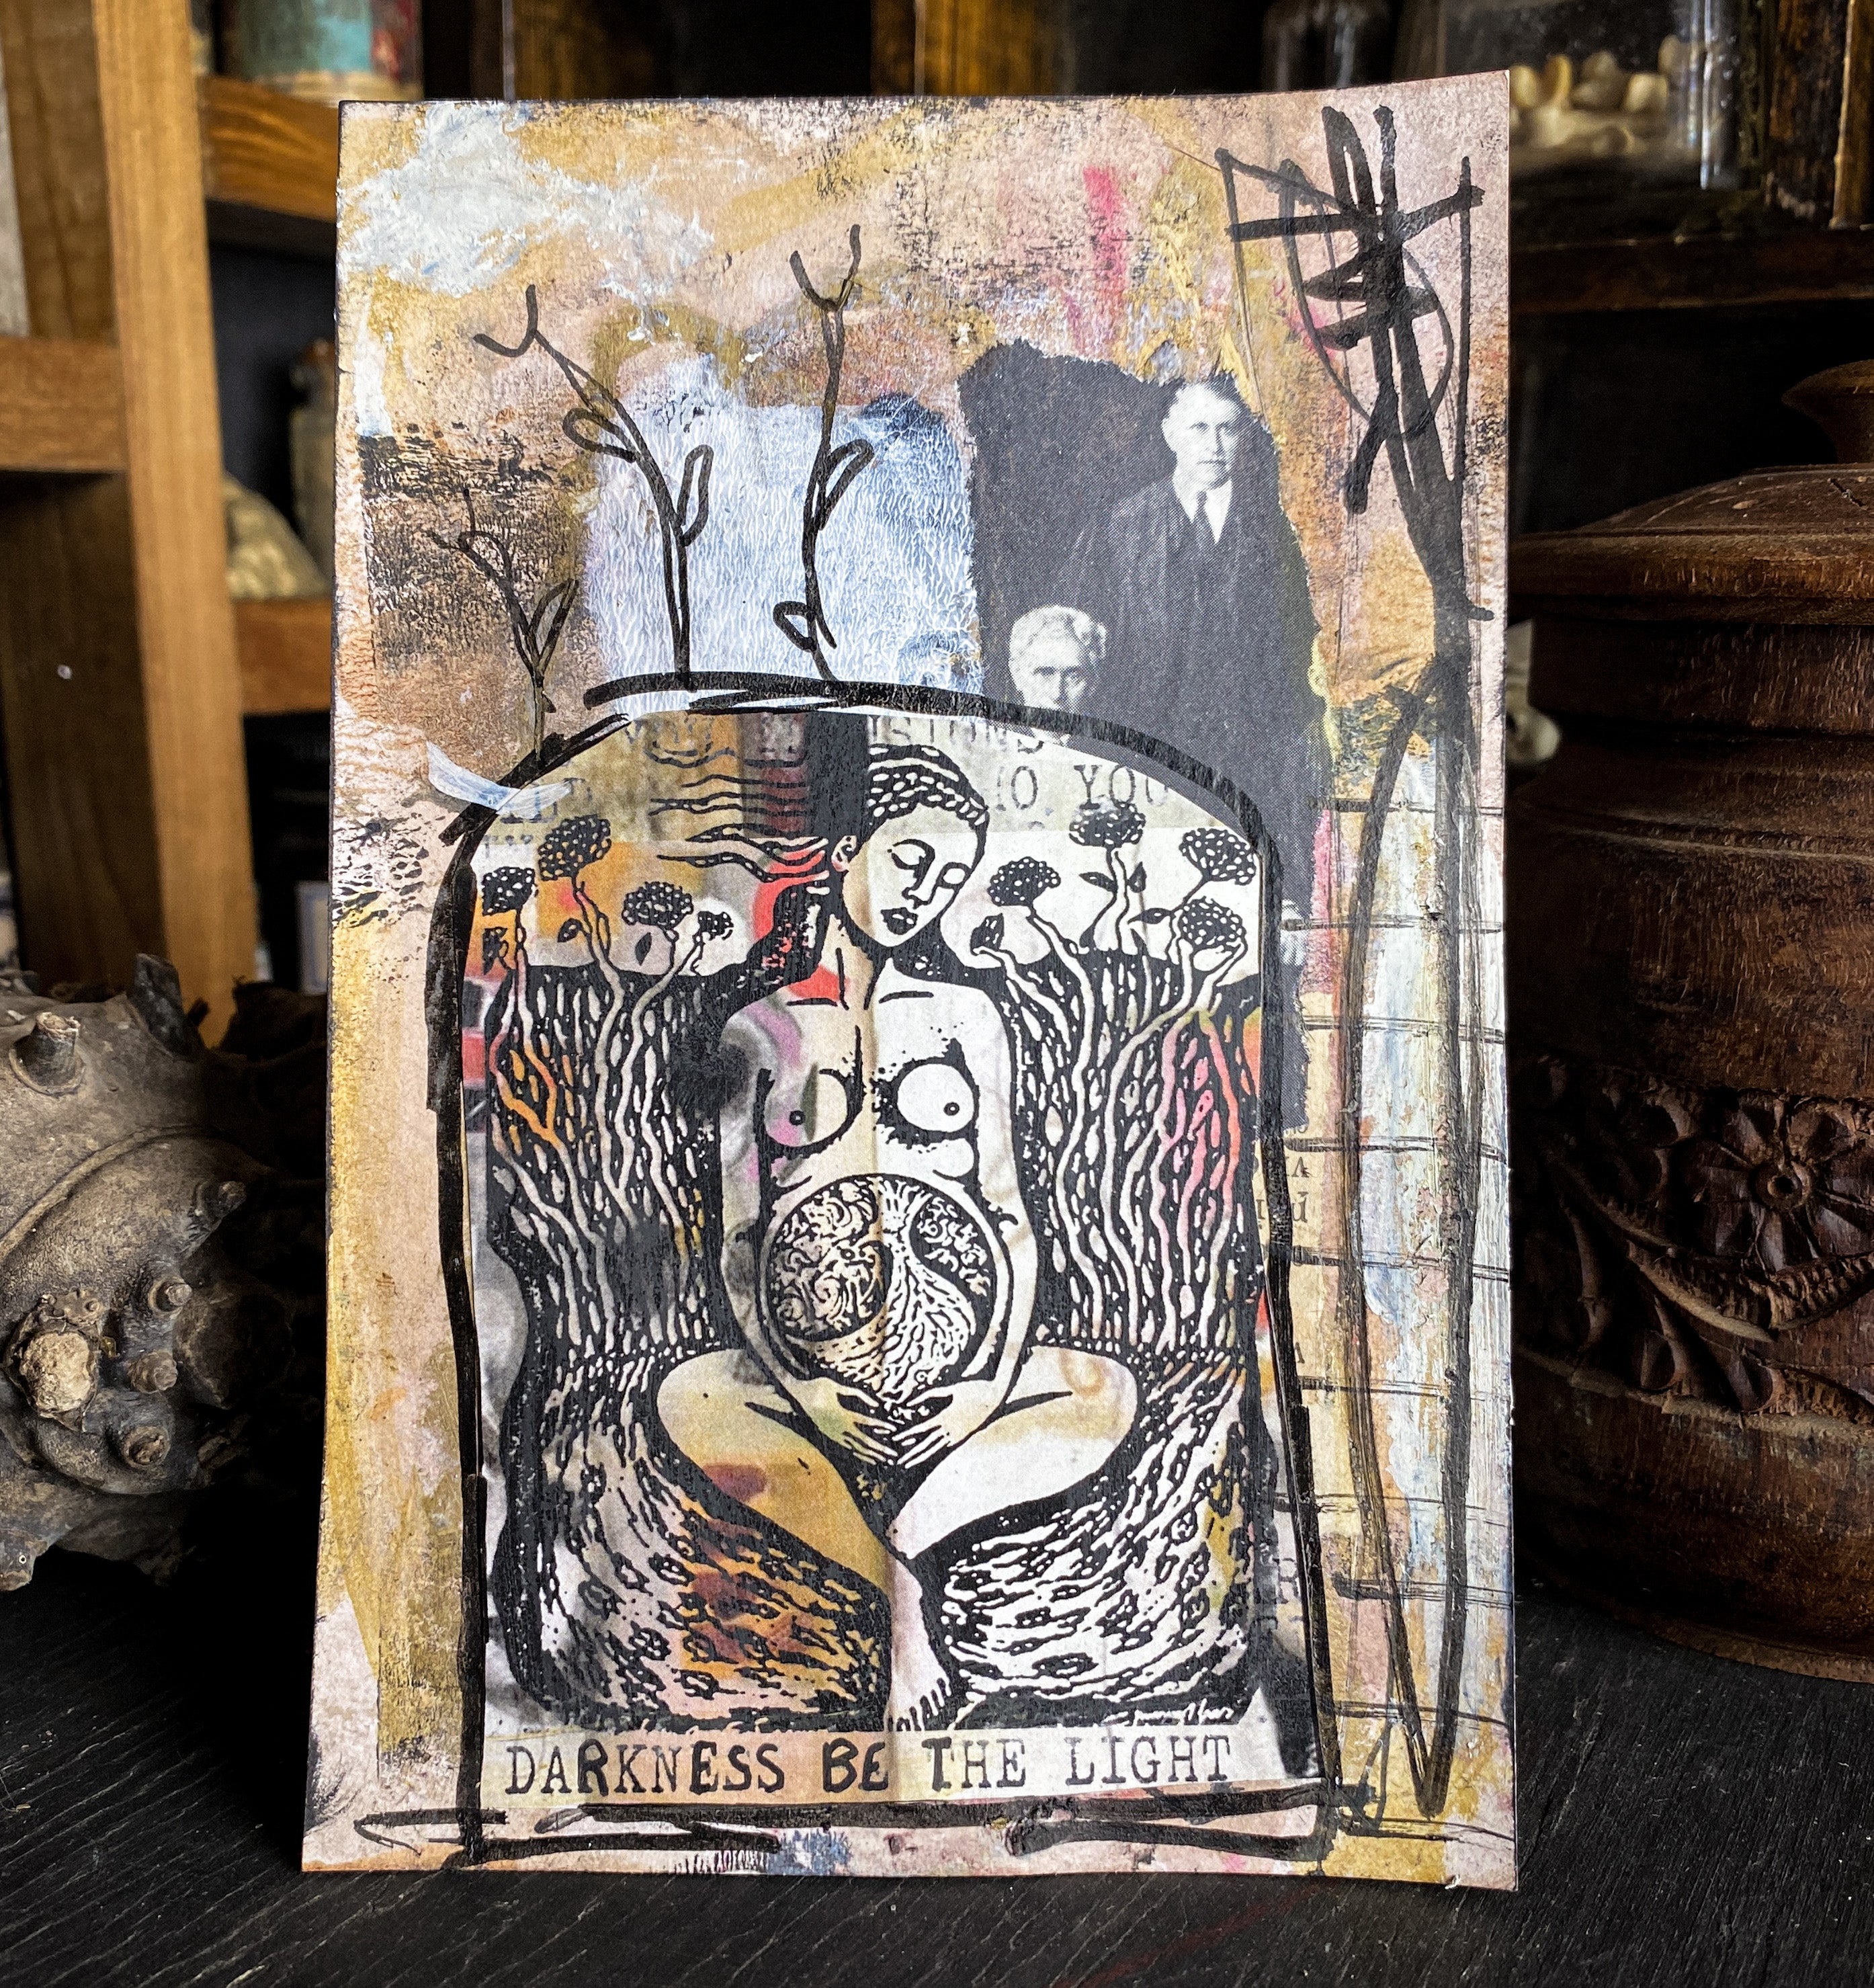 Darkness Be The Light - Original Mixed Media Collage